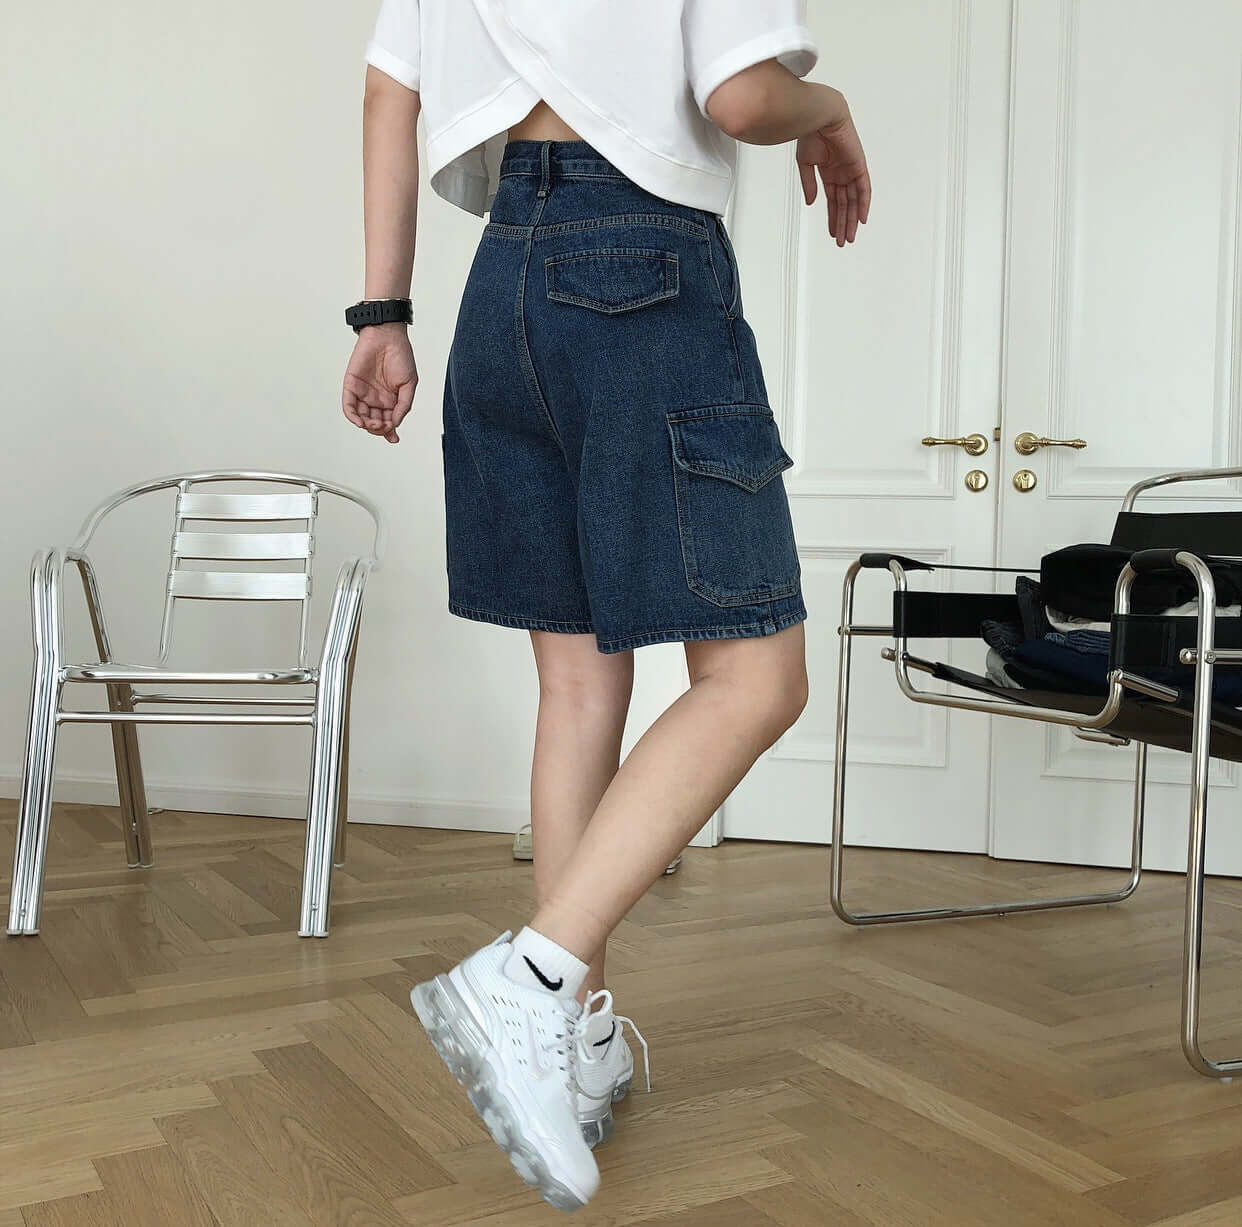 Summer new Europe and America street hipster high waist cowboy pants pocket straight loose fashion five pants shorts women